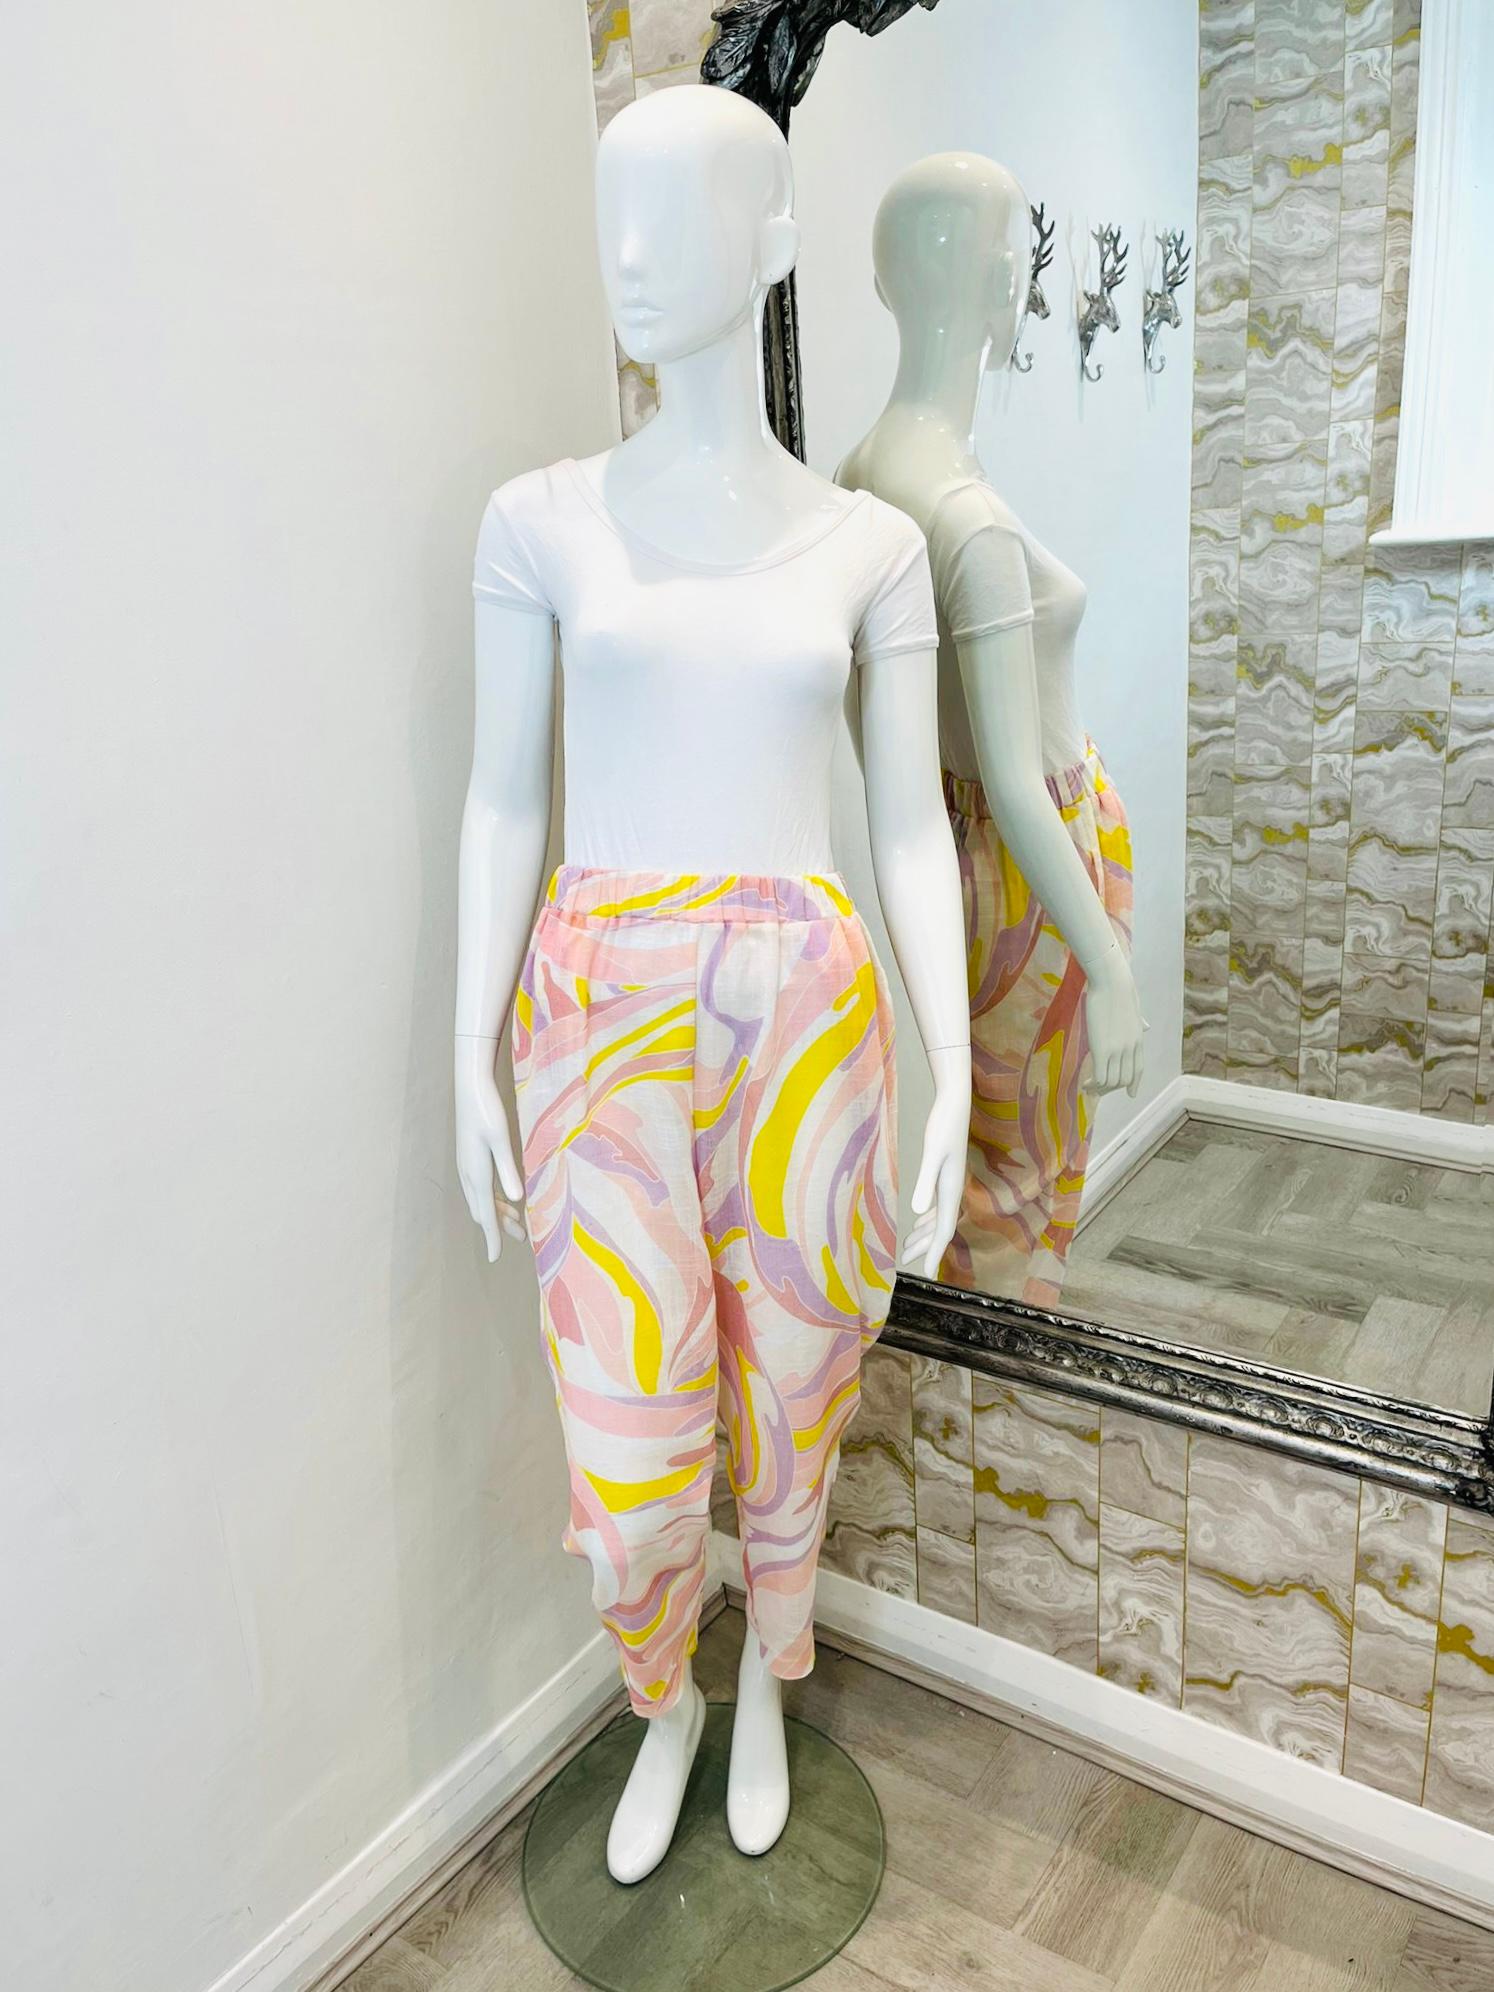 Emilio Pucci Cropped Cotton Trousers

Multicoloured trousers with signature vetrate print through out.

Hip pockets and elasticated waist. Rrp approx £890.

Size - 42IT

Condition - Very Good

Composition - Cotton 